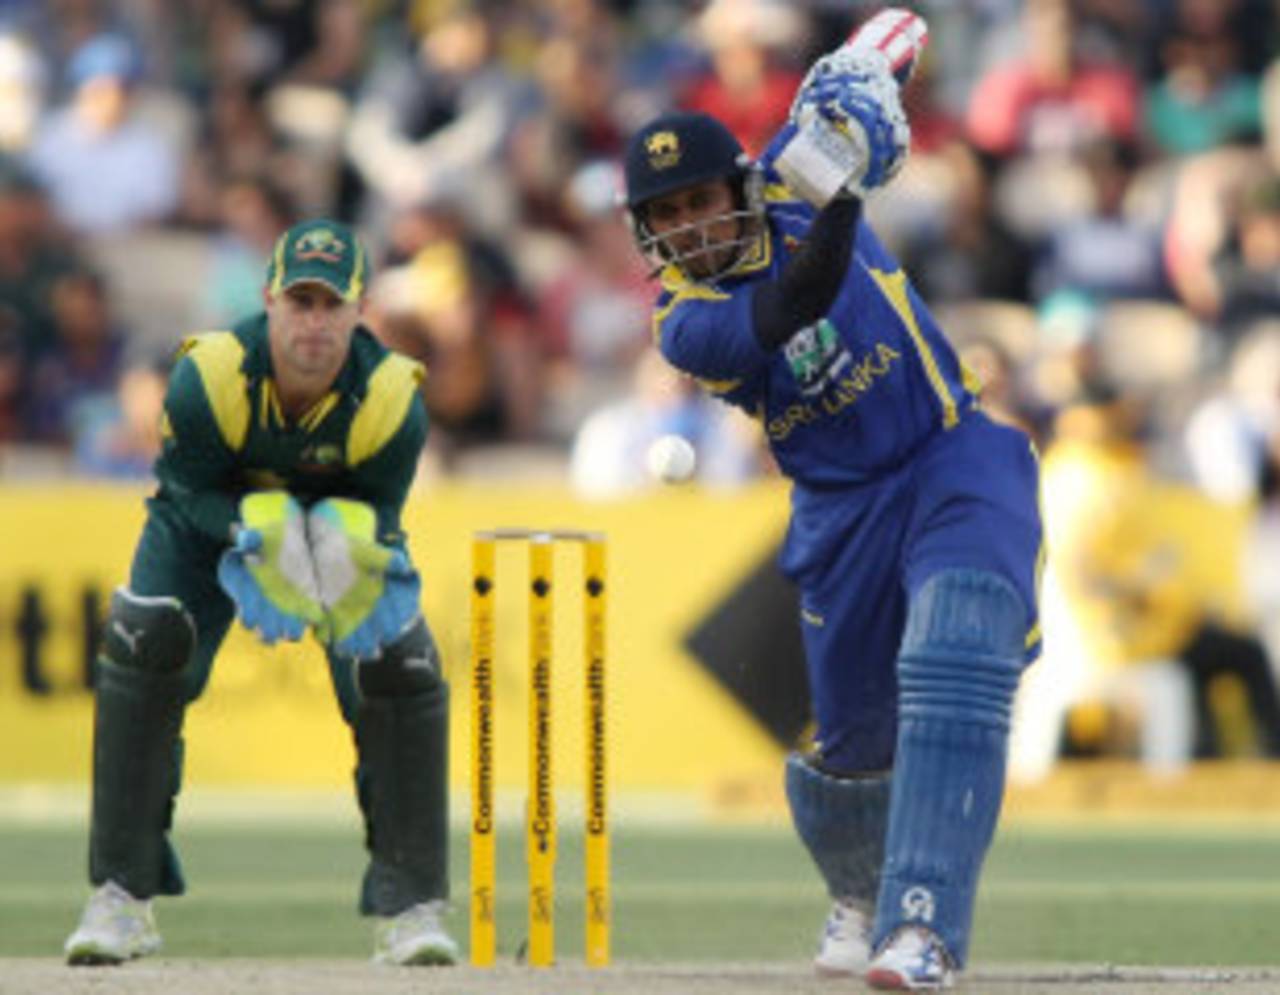 Tillakaratne Dilshan scored his second century of the tournament and became the highest run-getter in the tri-series&nbsp;&nbsp;&bull;&nbsp;&nbsp;Getty Images